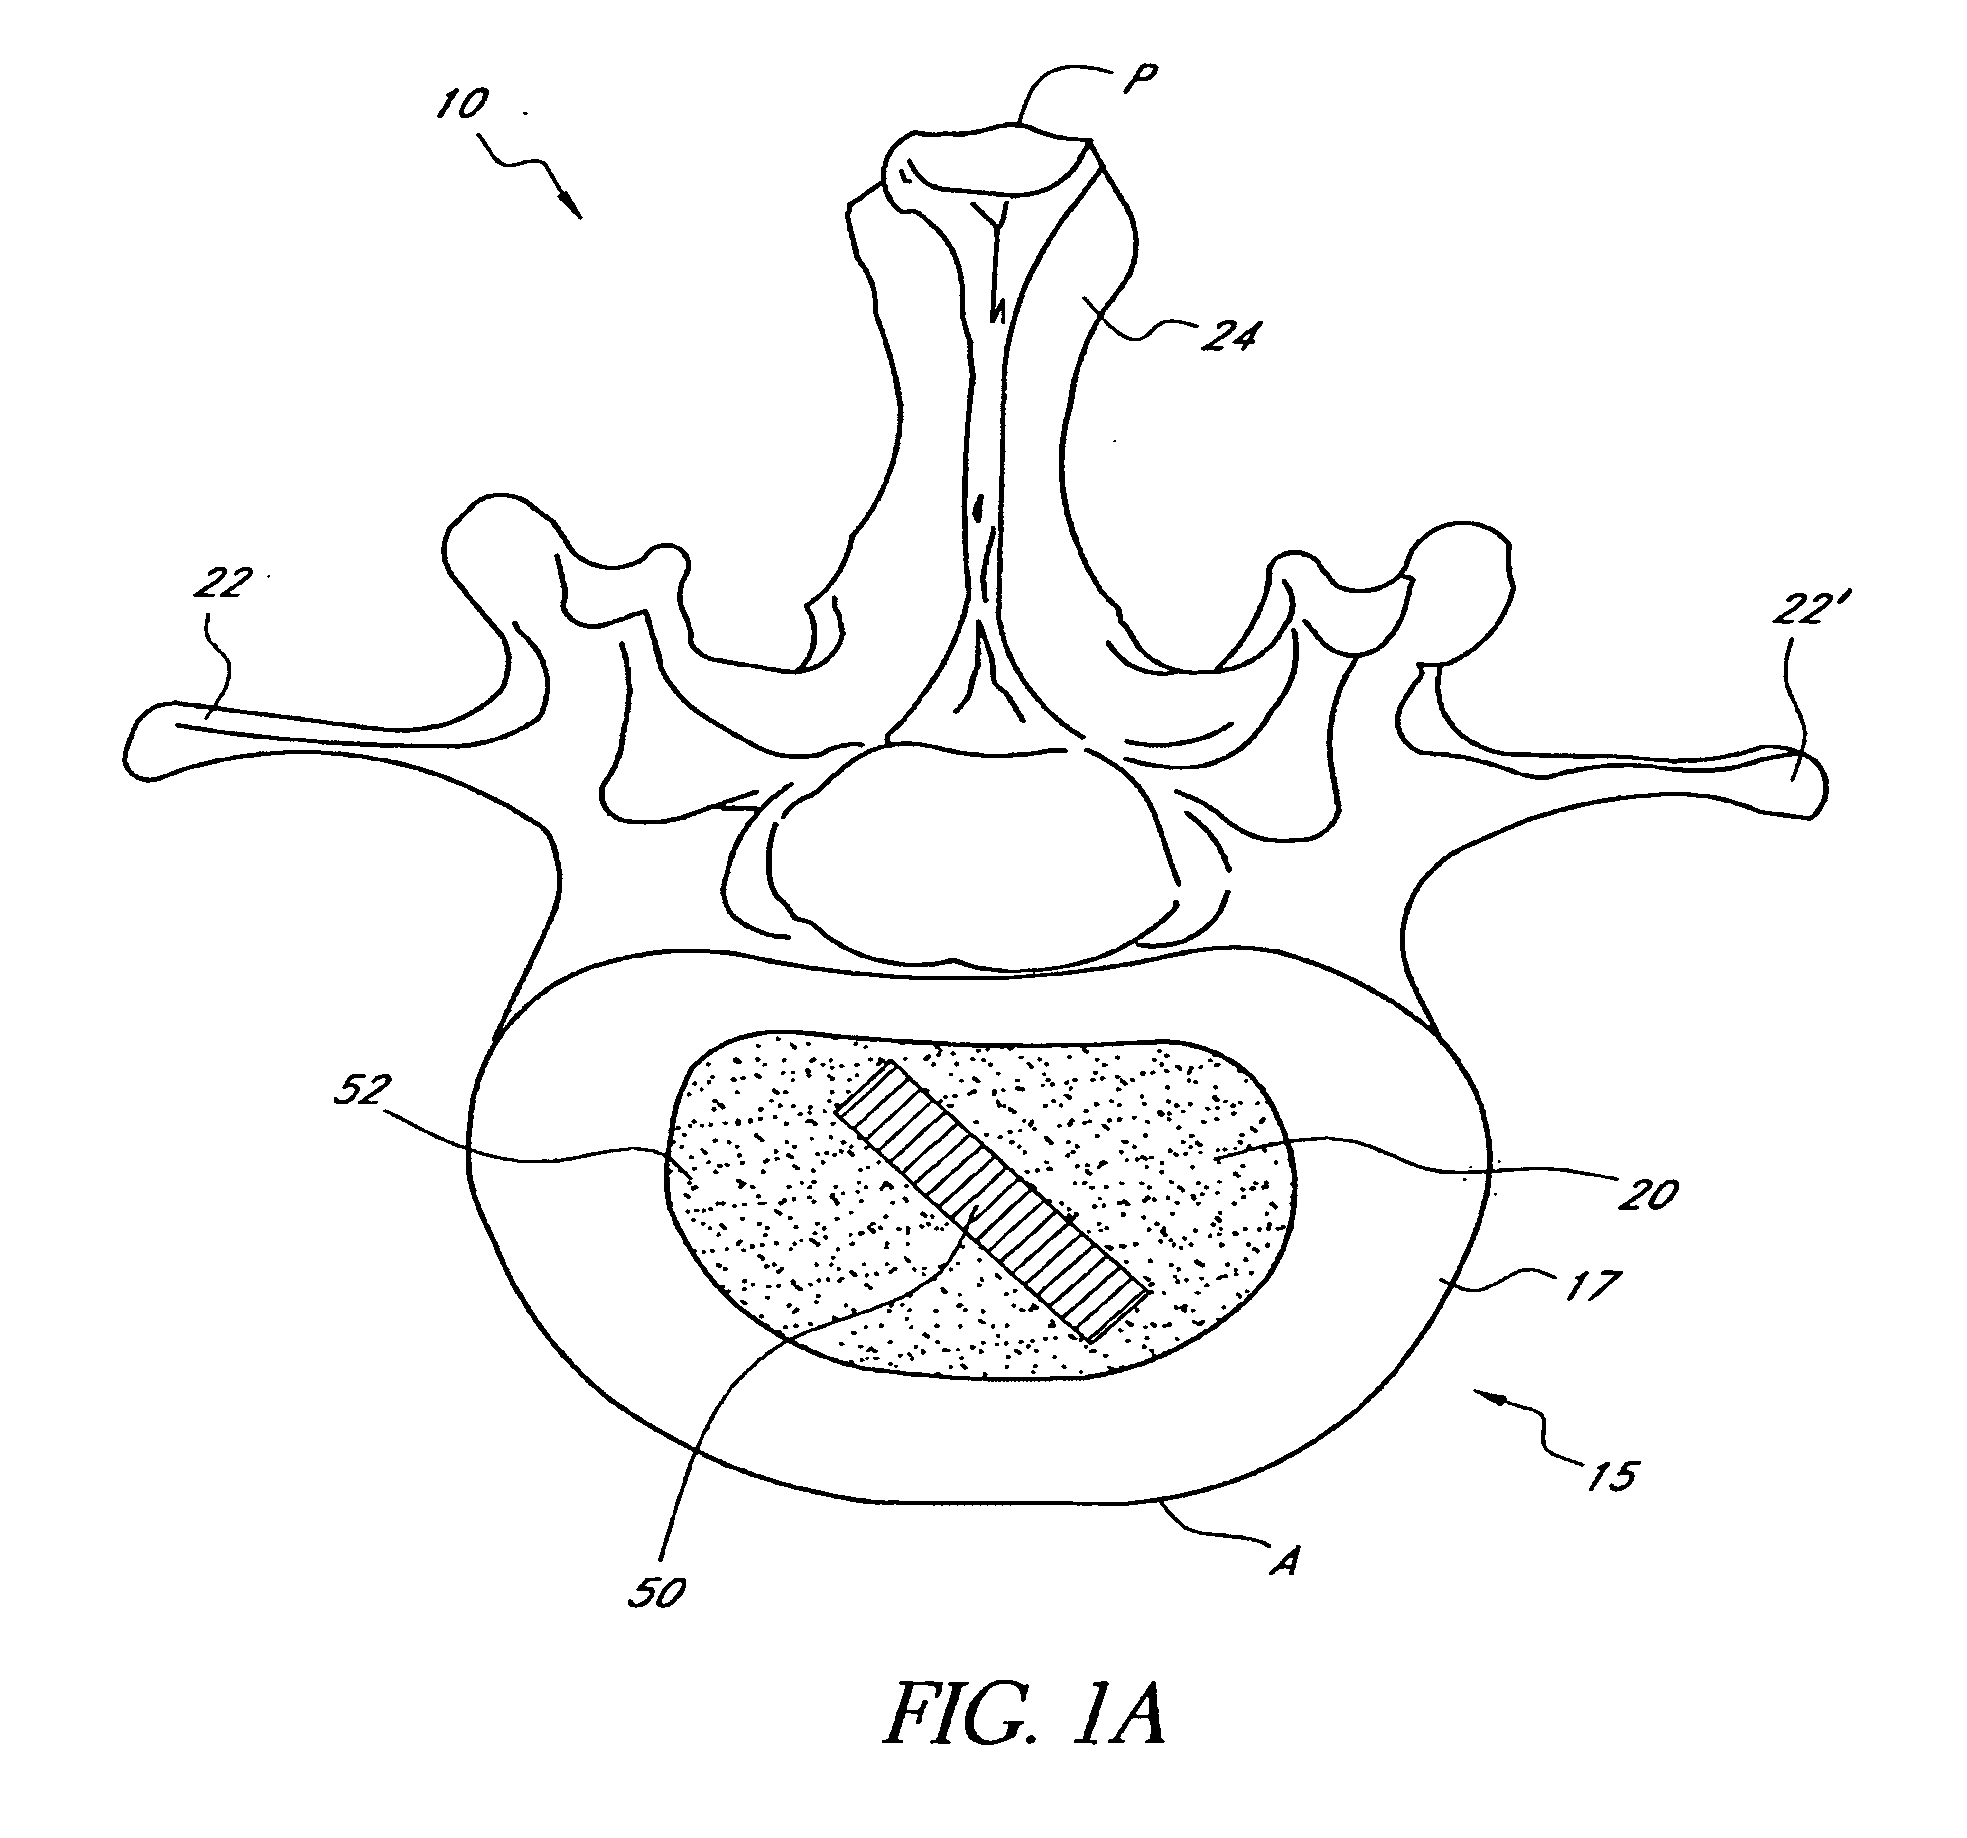 Method of monitoring characteristics of an intervertebral disc and implantable prosthetic